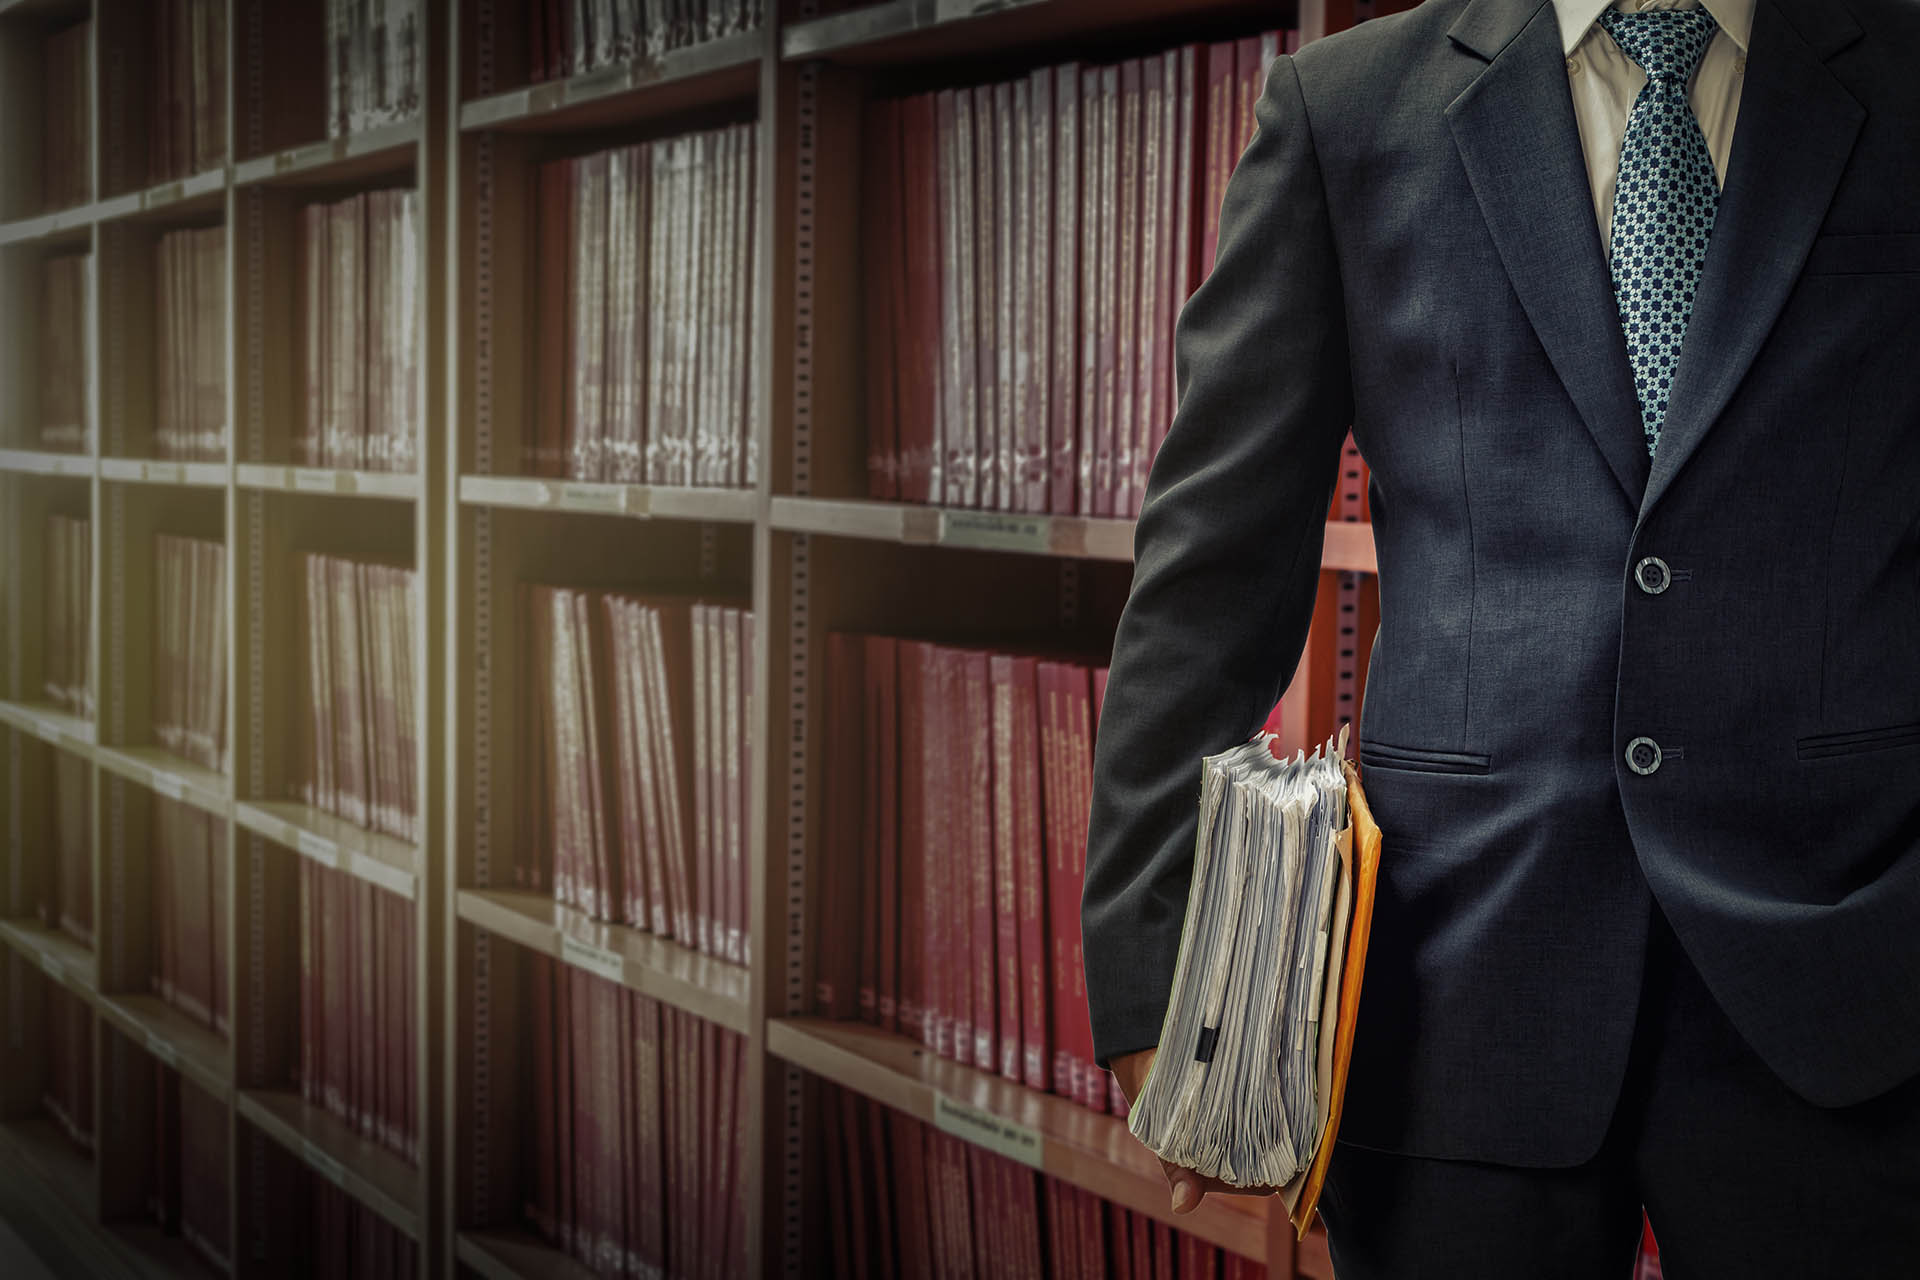 Tips For Getting Into Law School